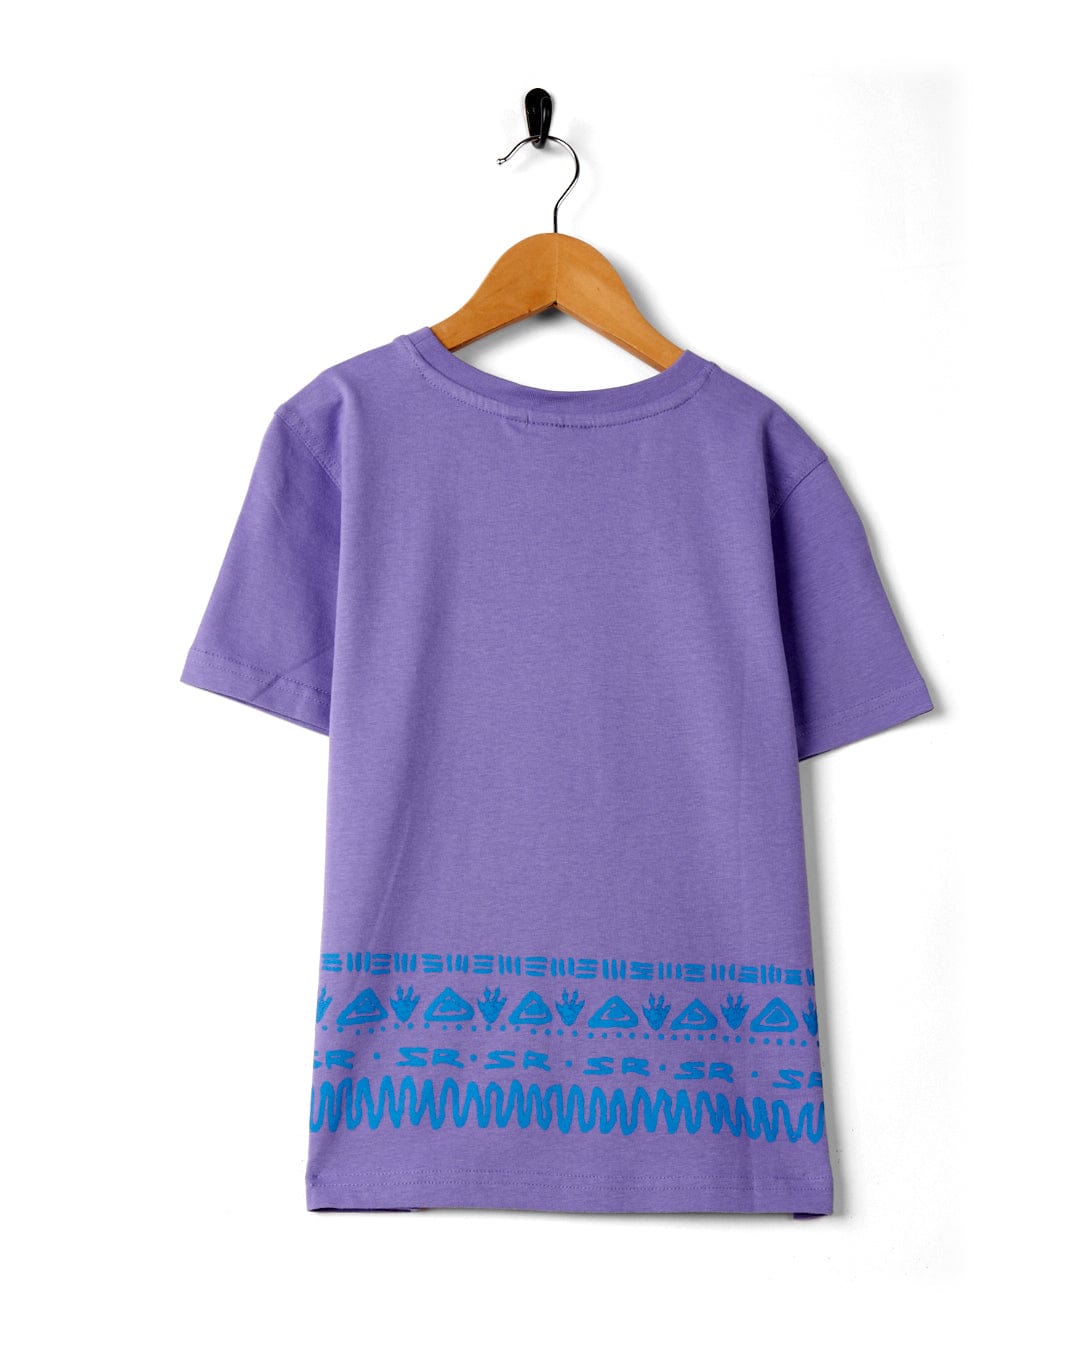 A Back in the Day - Boys Short Sleeve T-Shirt - Purple with blue and purple designs, perfect for those with a bohemian style.